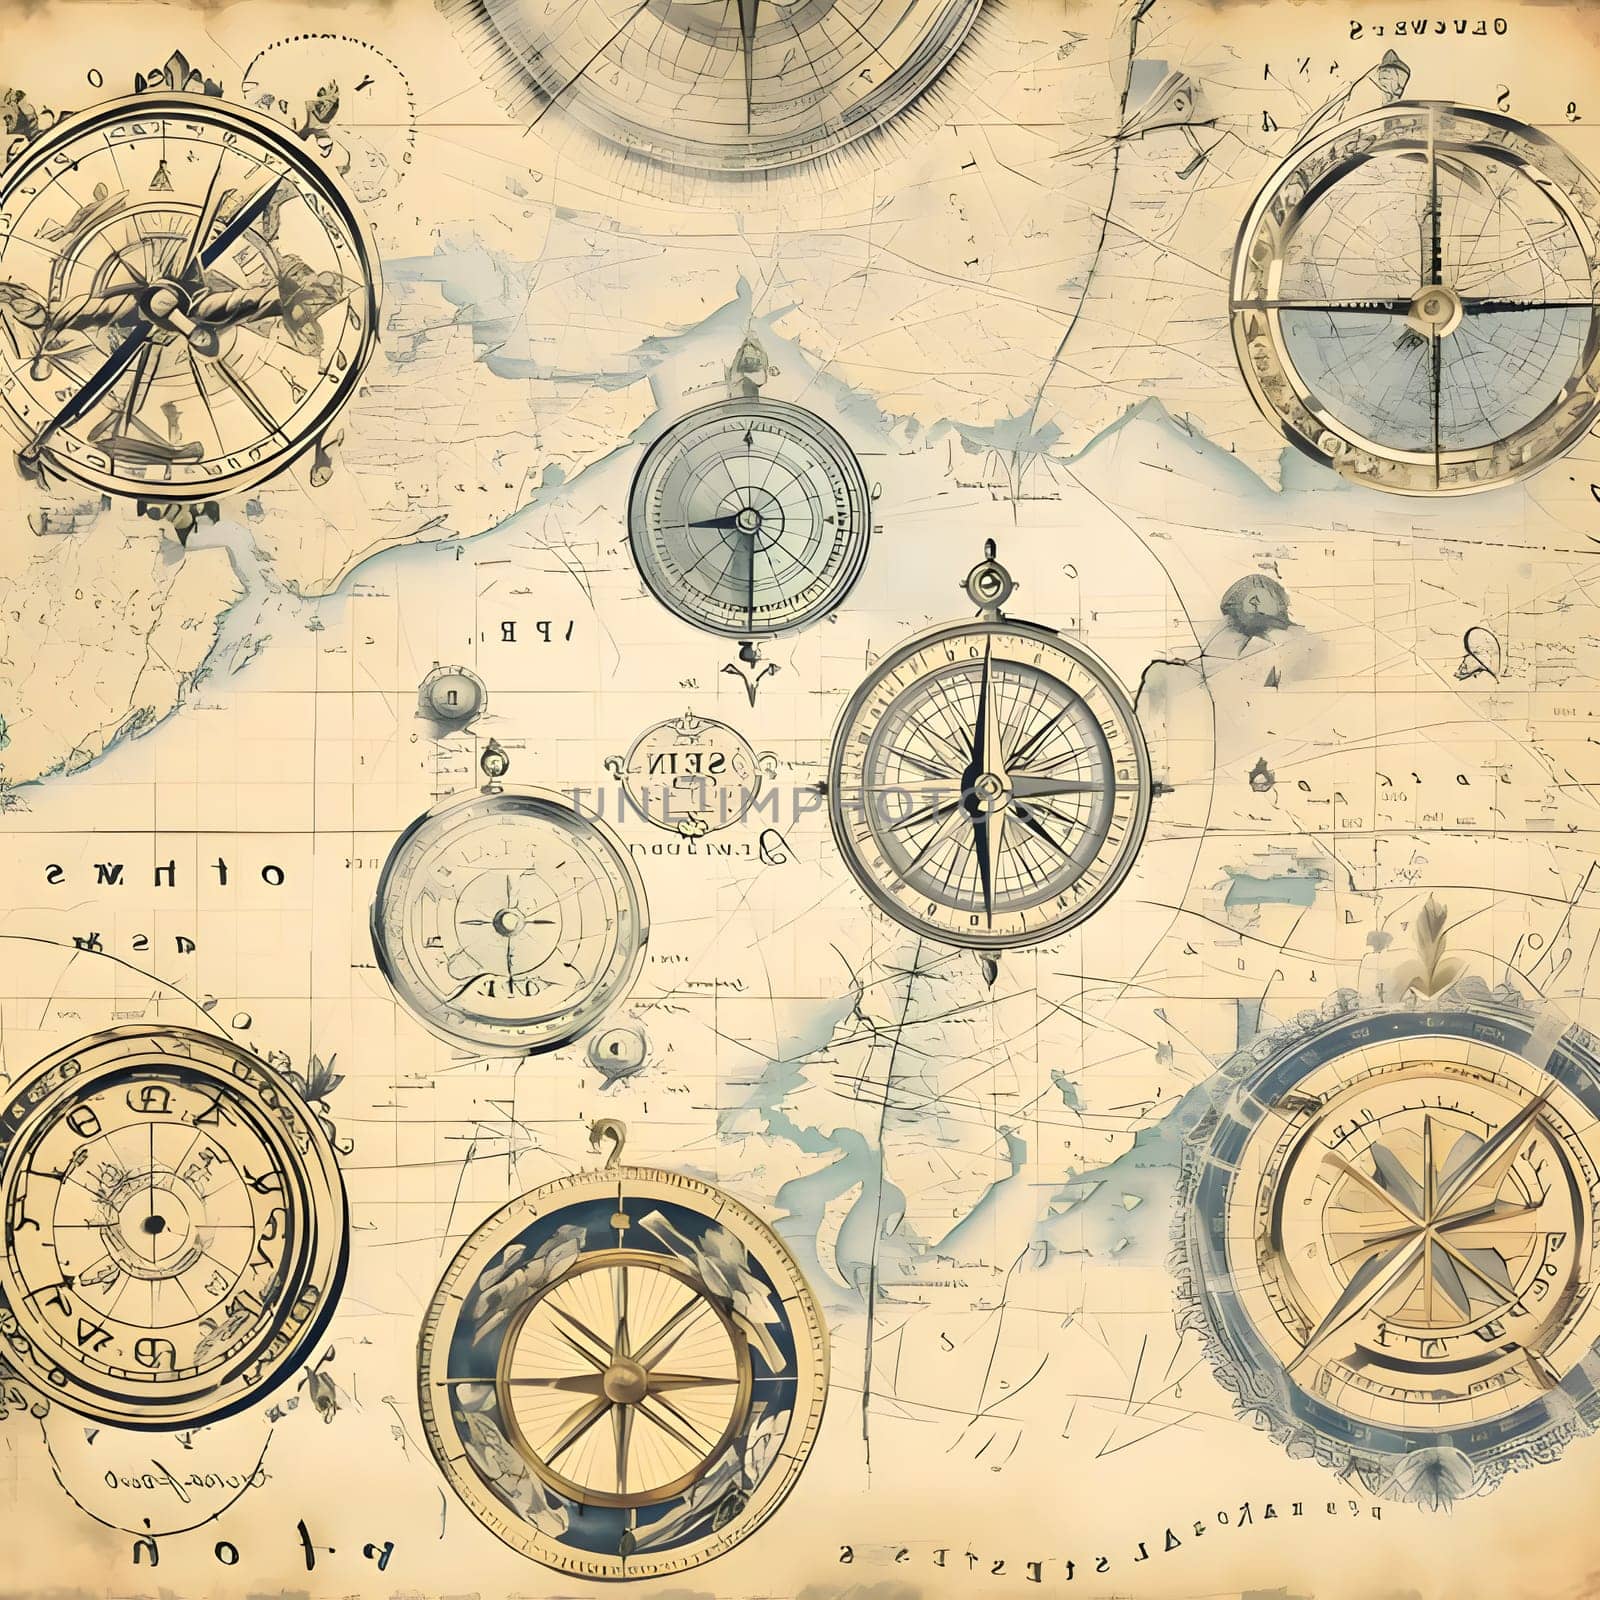 Patterns and banners backgrounds: Old map with compass and wind rose. Vintage style. Travel background.